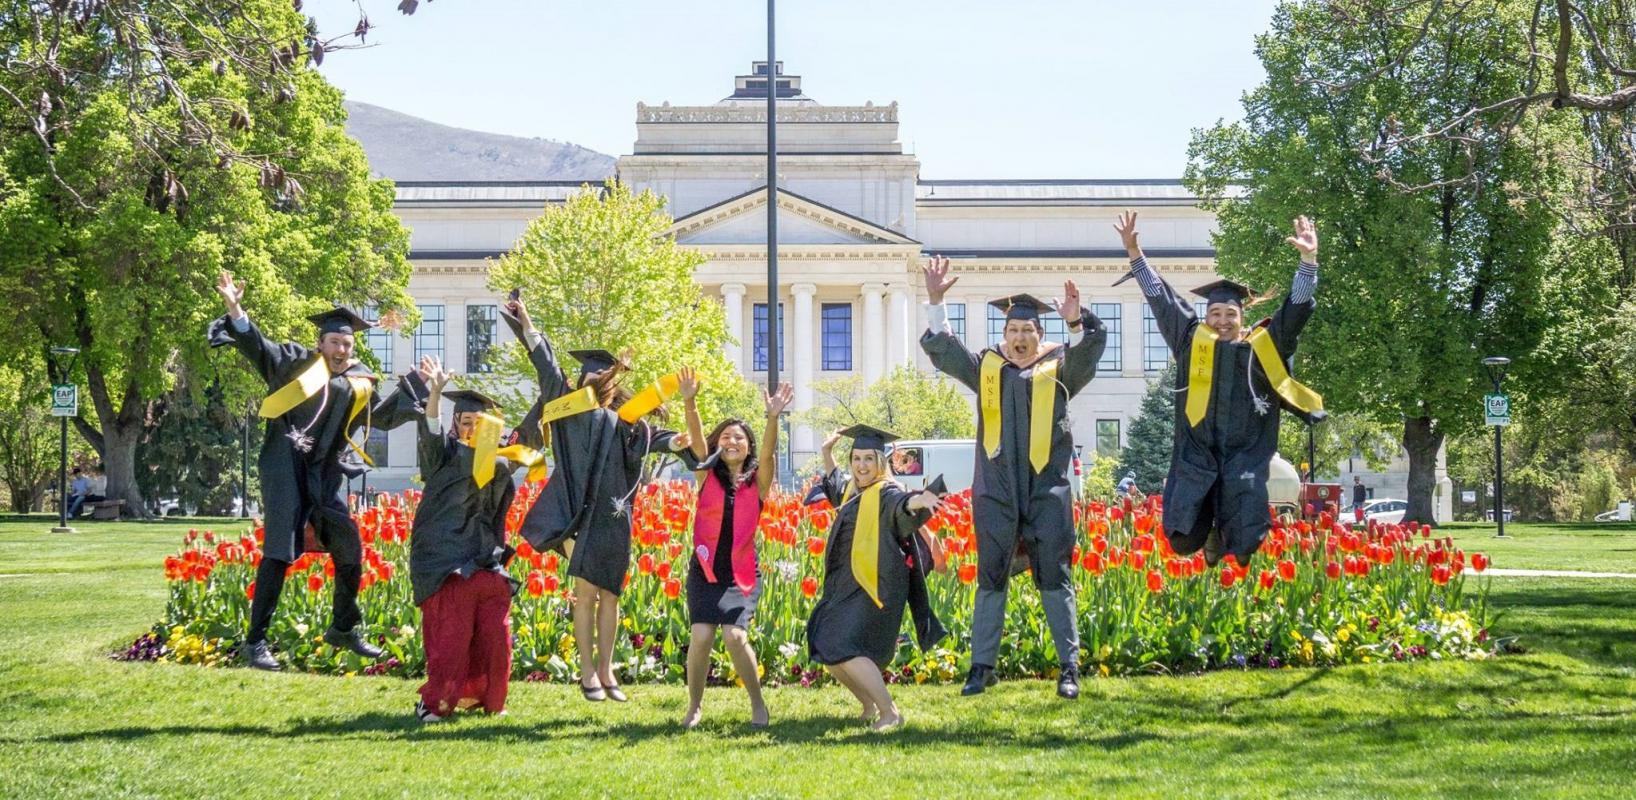 Group of Graduating students jumping in their caps and gowns